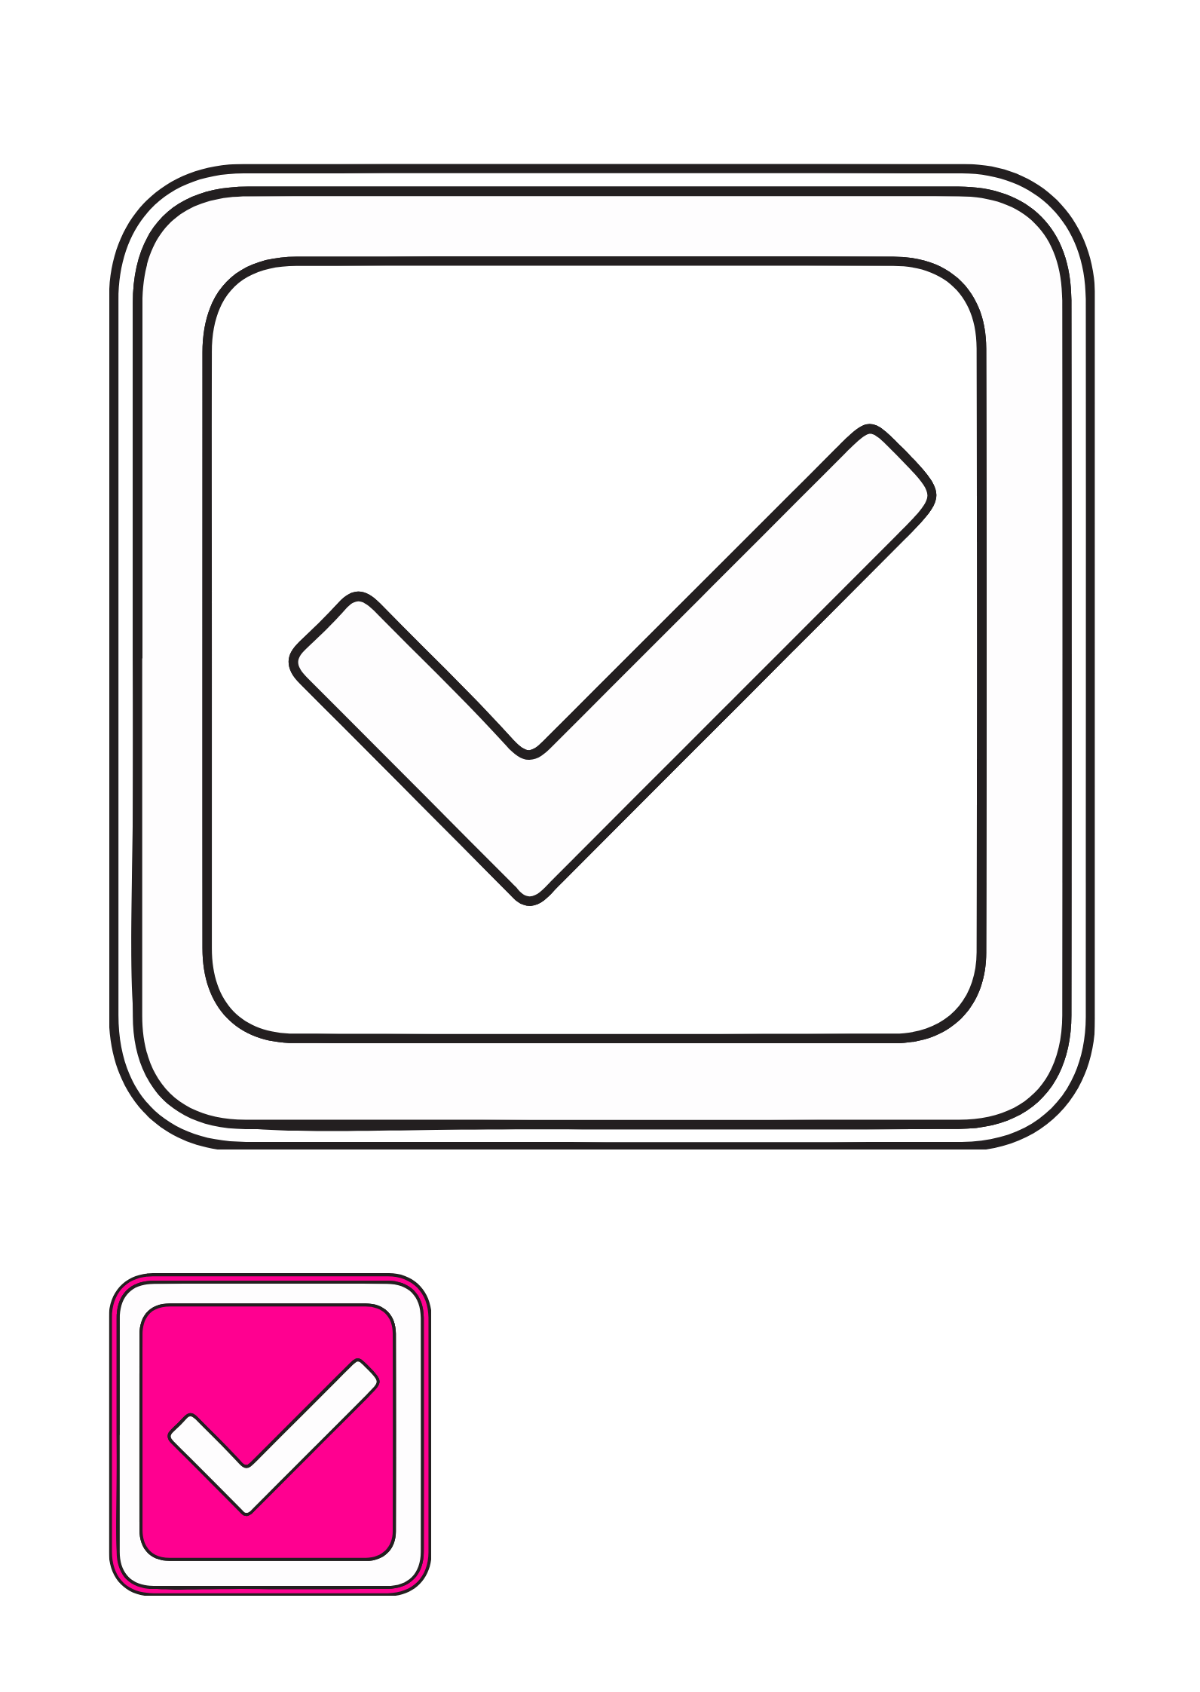 Free Pink Check/Tick Mark Coloring Page Template